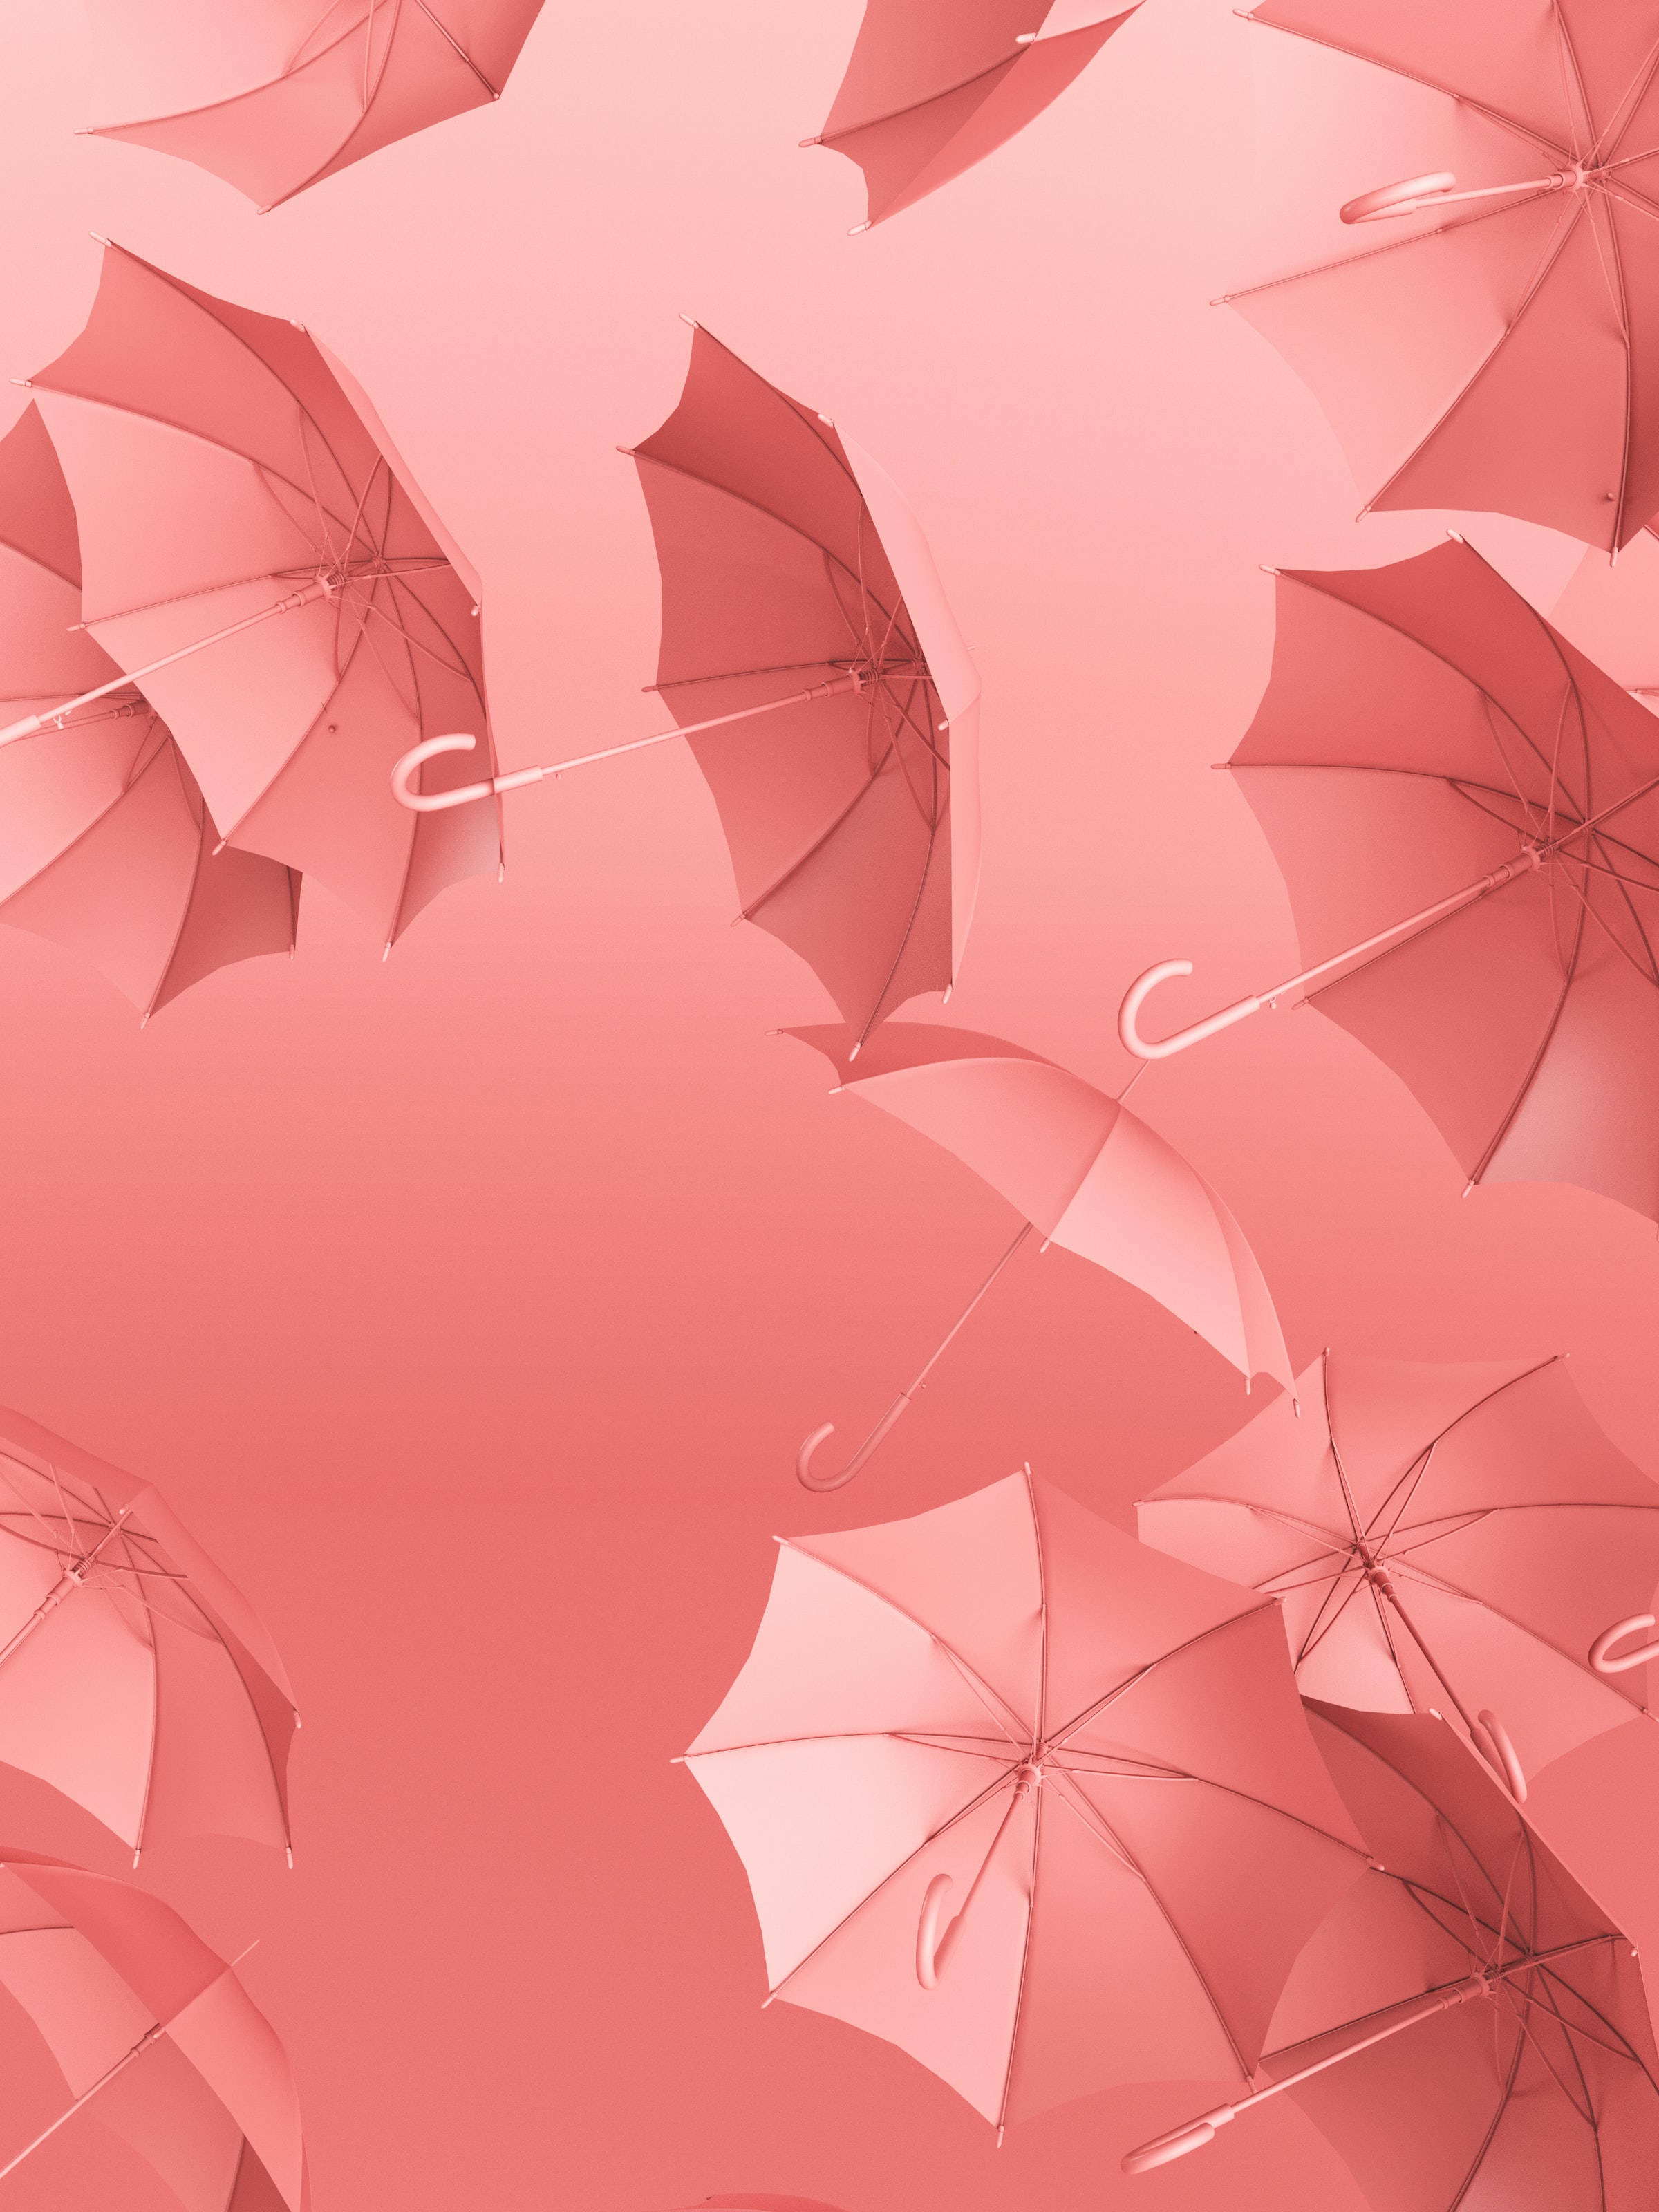 50 Cute and Pretty Pink Wallpapers For Free Download  Sweet Money Bee